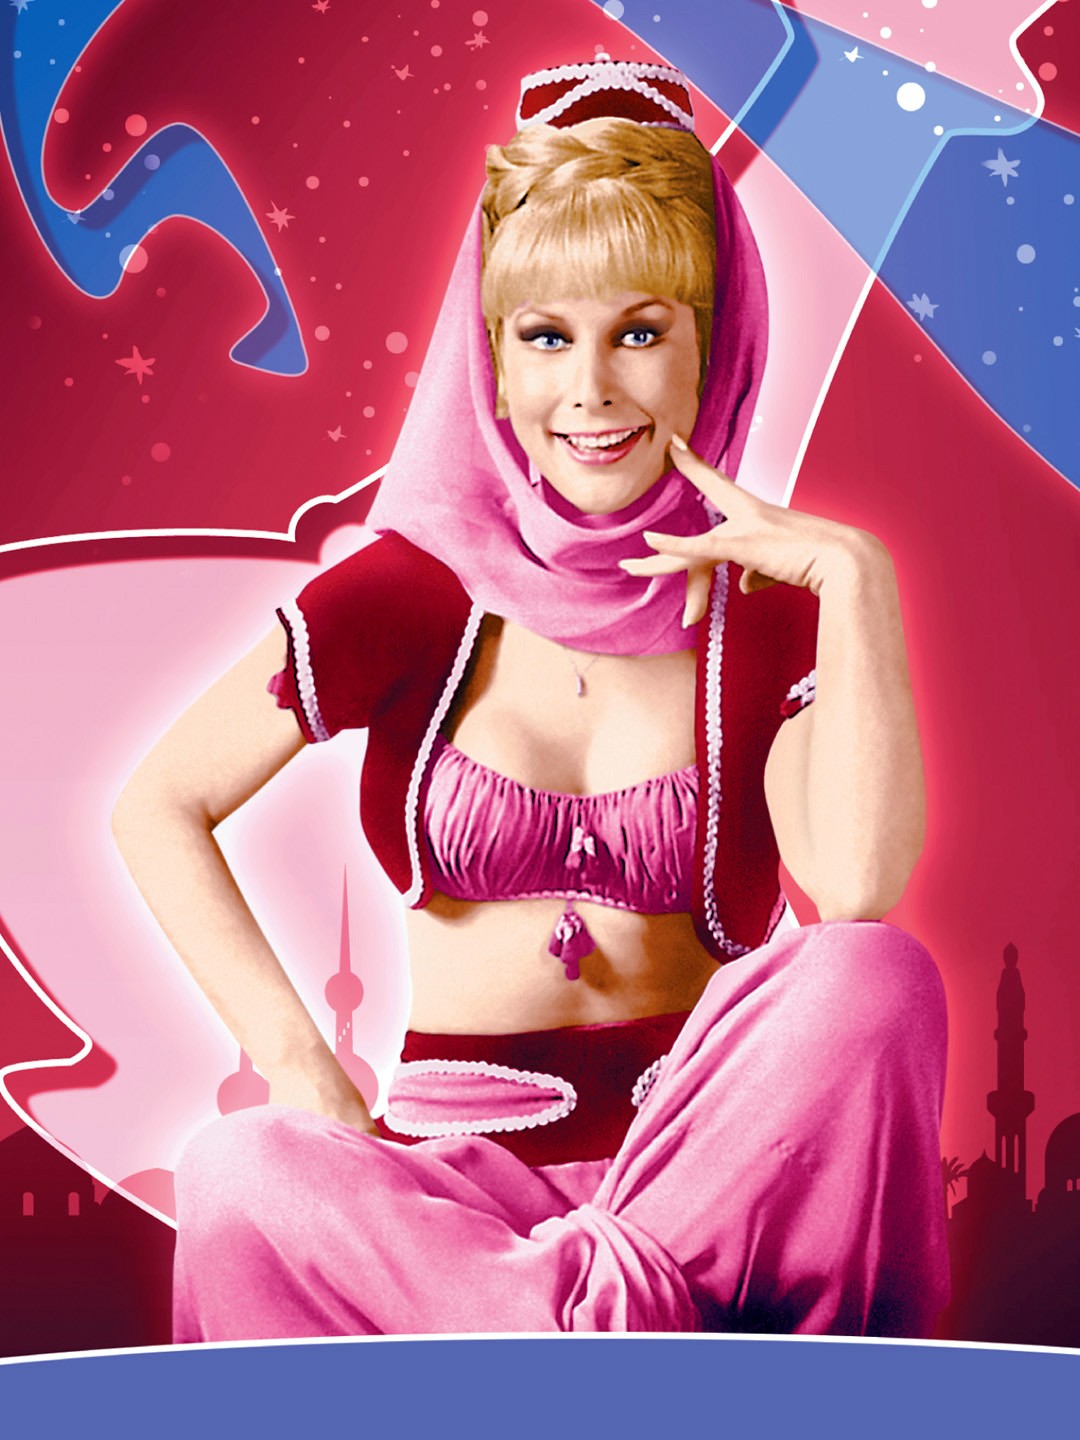 craig bartsch recommends Pictures Of I Dream Of Jeannie